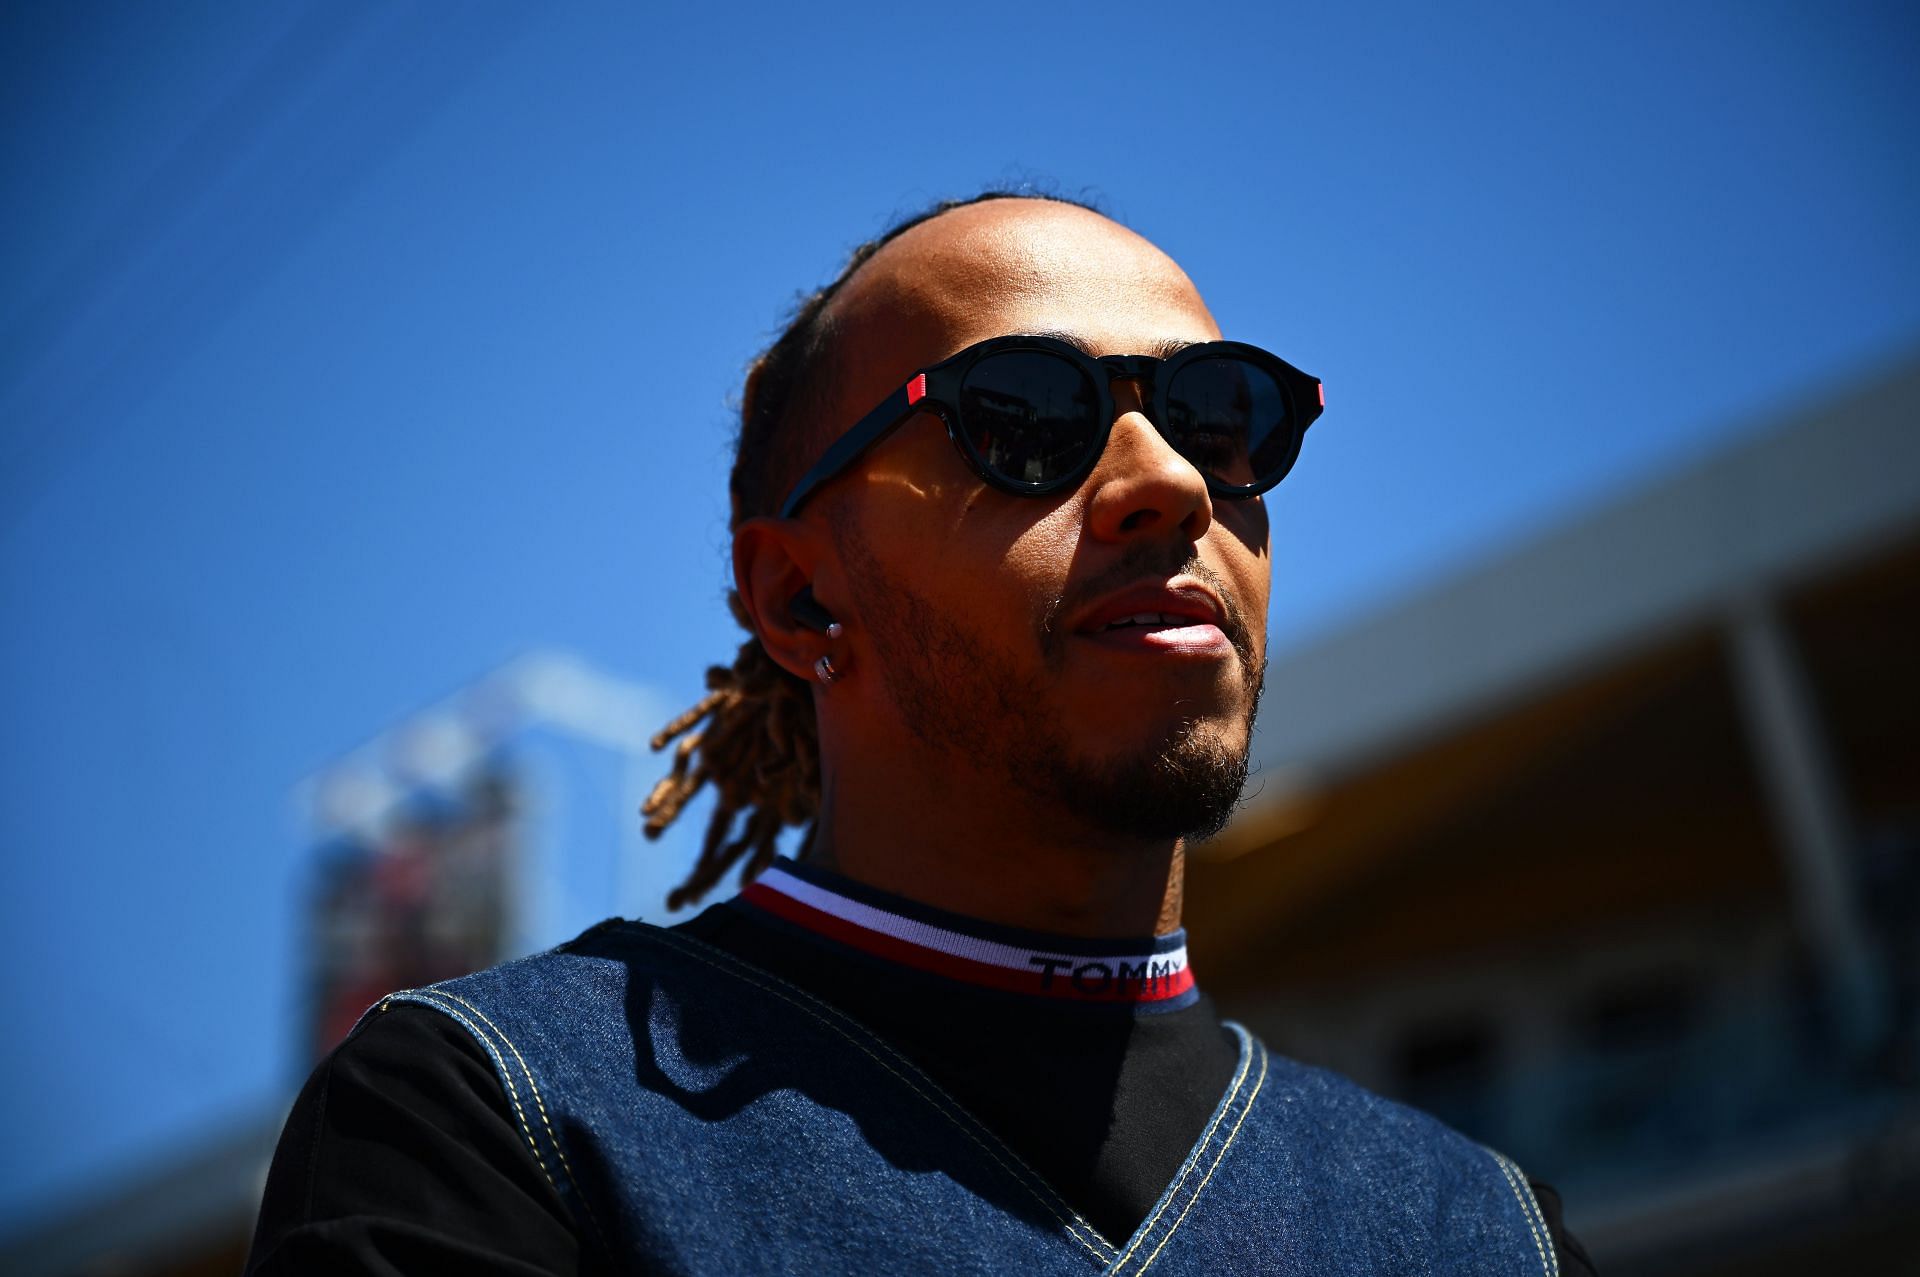 Lewis Hamilton looks on from the drivers parade ahead of the F1 Grand Prix of Canada at Circuit Gilles Villeneuve on June 19, 2022 in Montreal, Quebec. (Photo by Clive Mason/Getty Images)